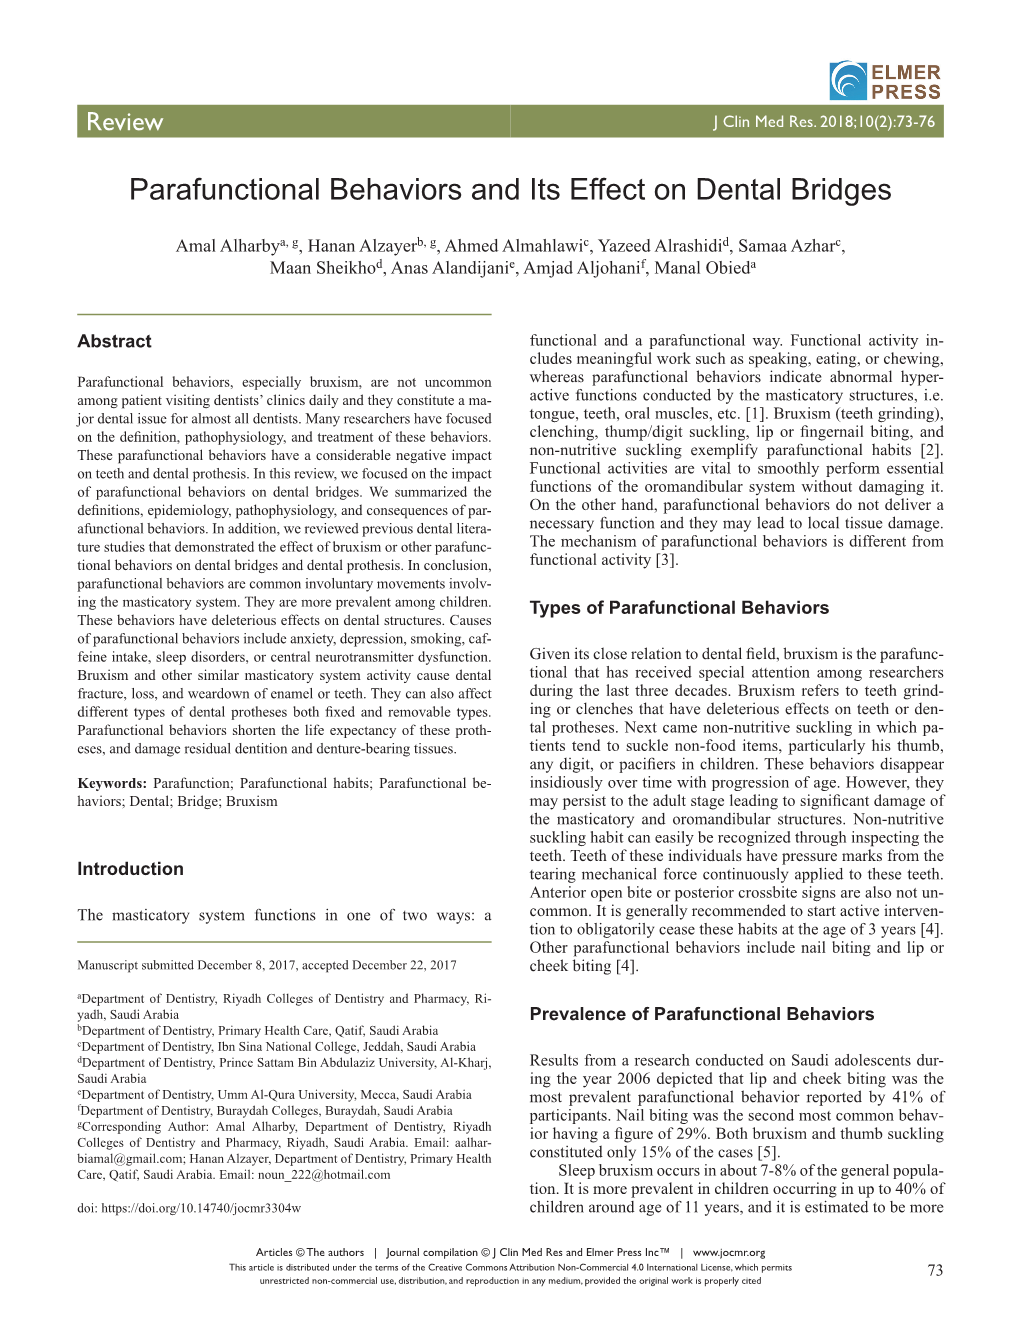 Parafunctional Behaviors and Its Effect on Dental Bridges